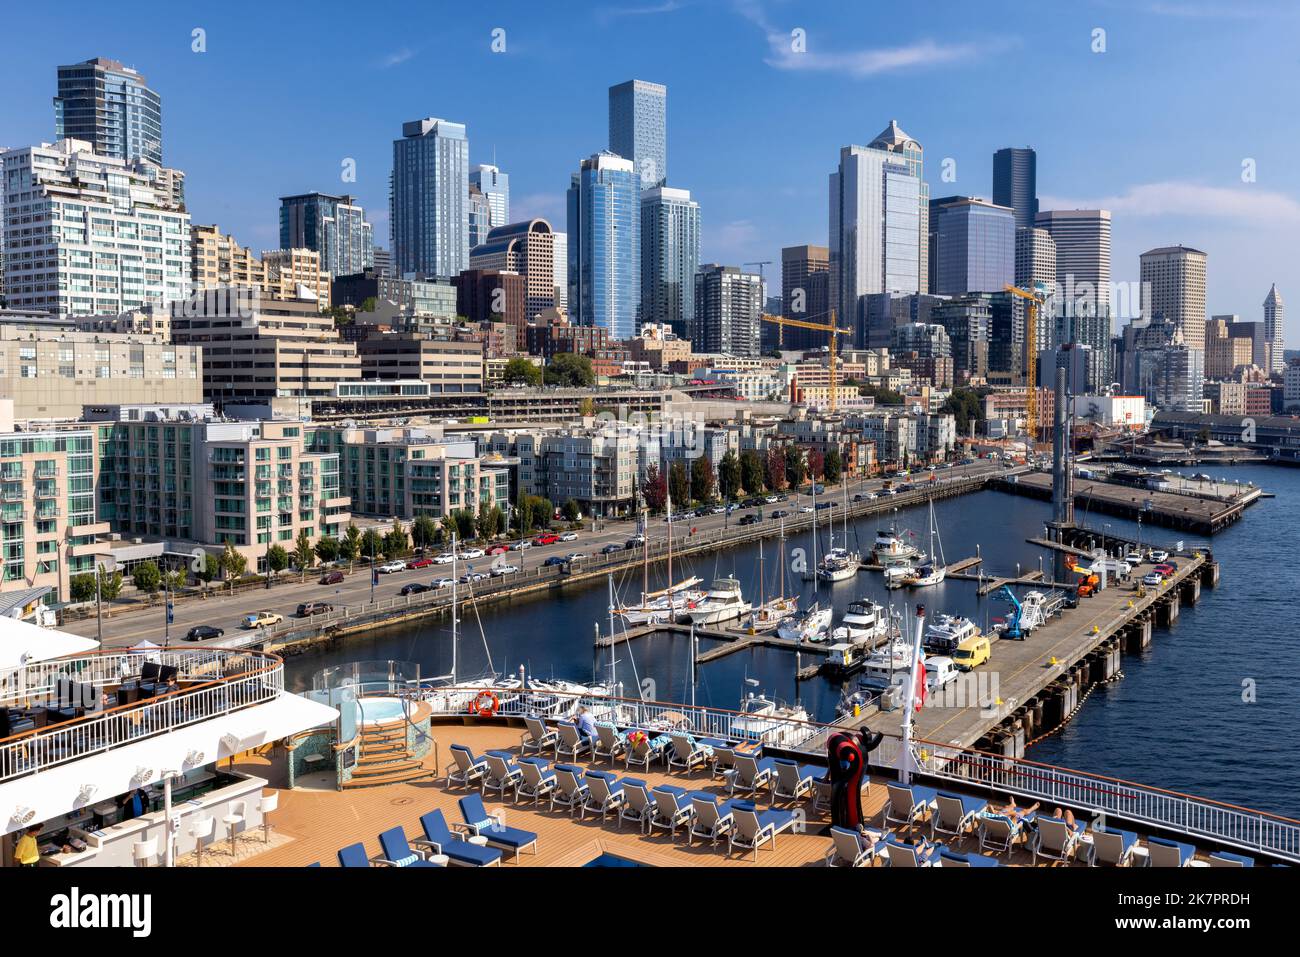 Downtown Seattle Skyline viewed from cruise ship at Pier 66 in Seattle, Washington, USA Stock Photo